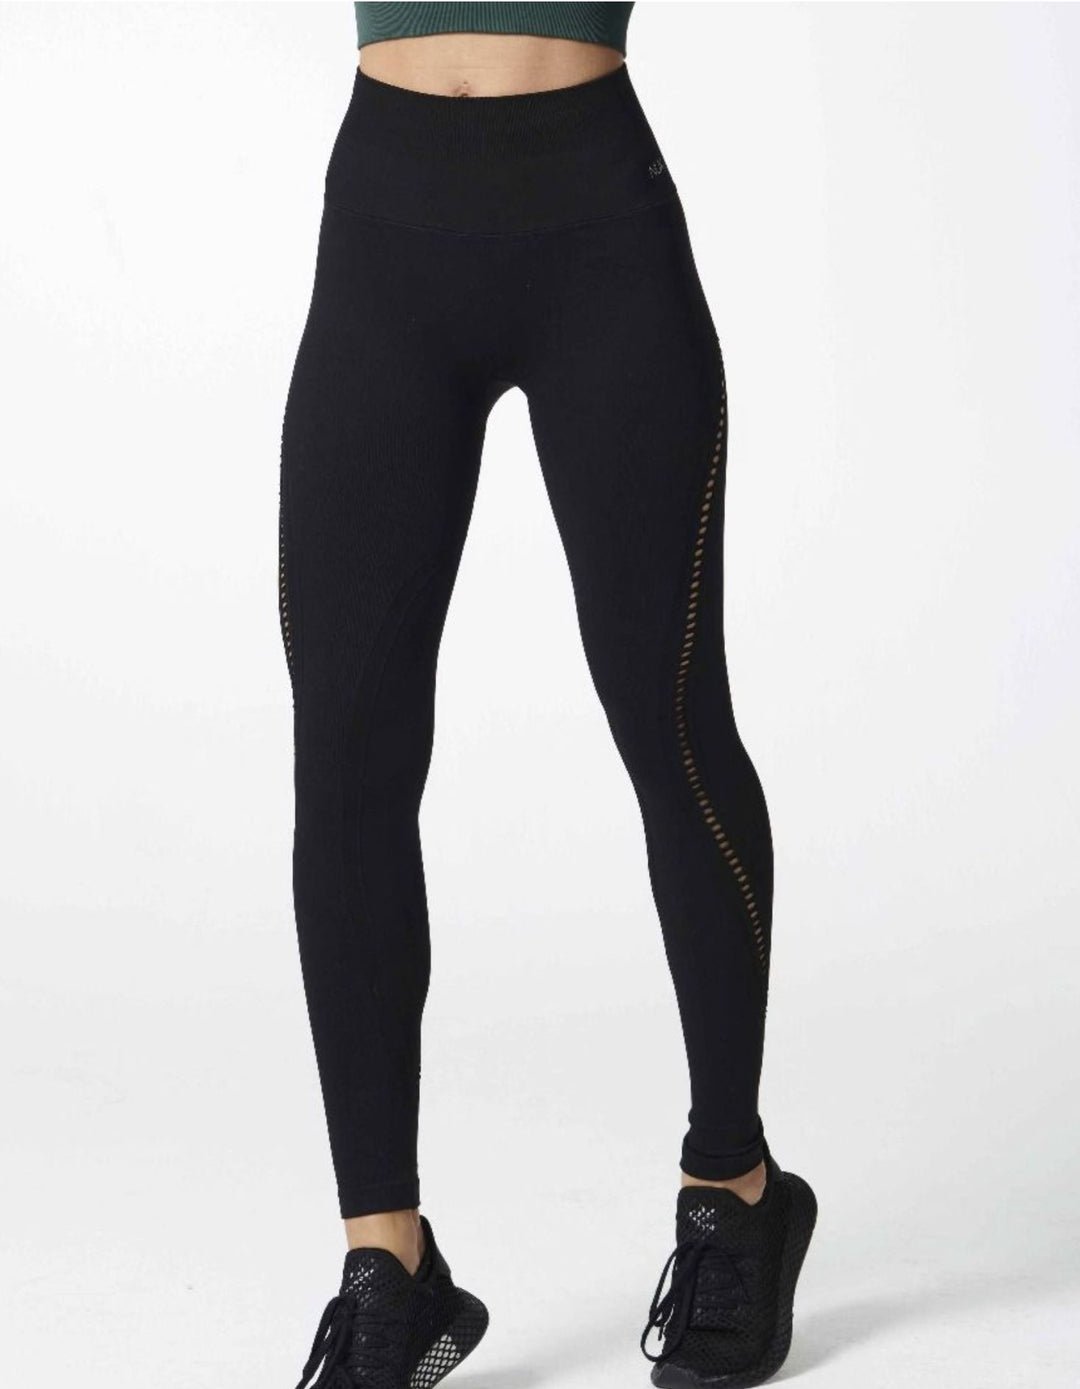 NUX | Black Yoga Body Contour Legging | Style # P4703| Made in the USA | Classy Cozy Cool Women’s Clothing Boutique